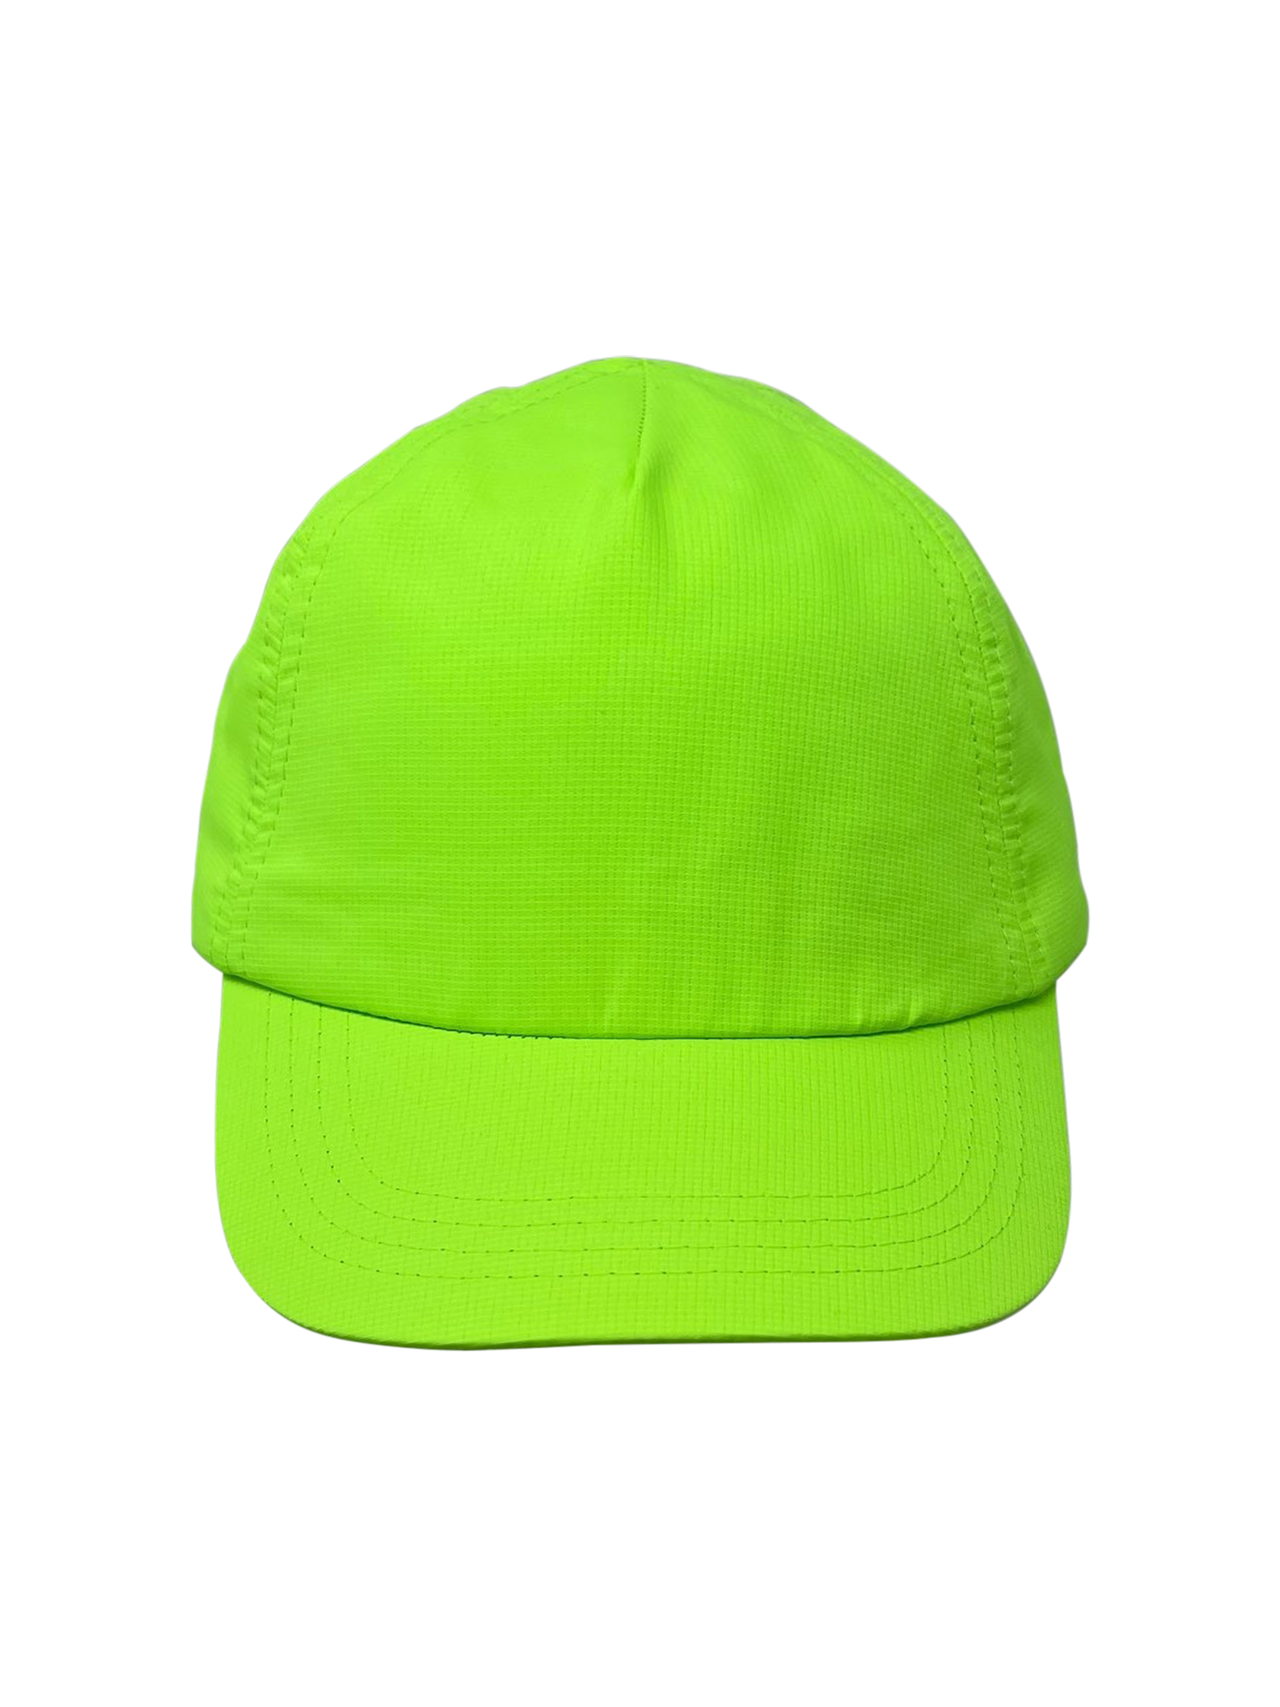 Kids Water Proof Safety Hat Neon Green